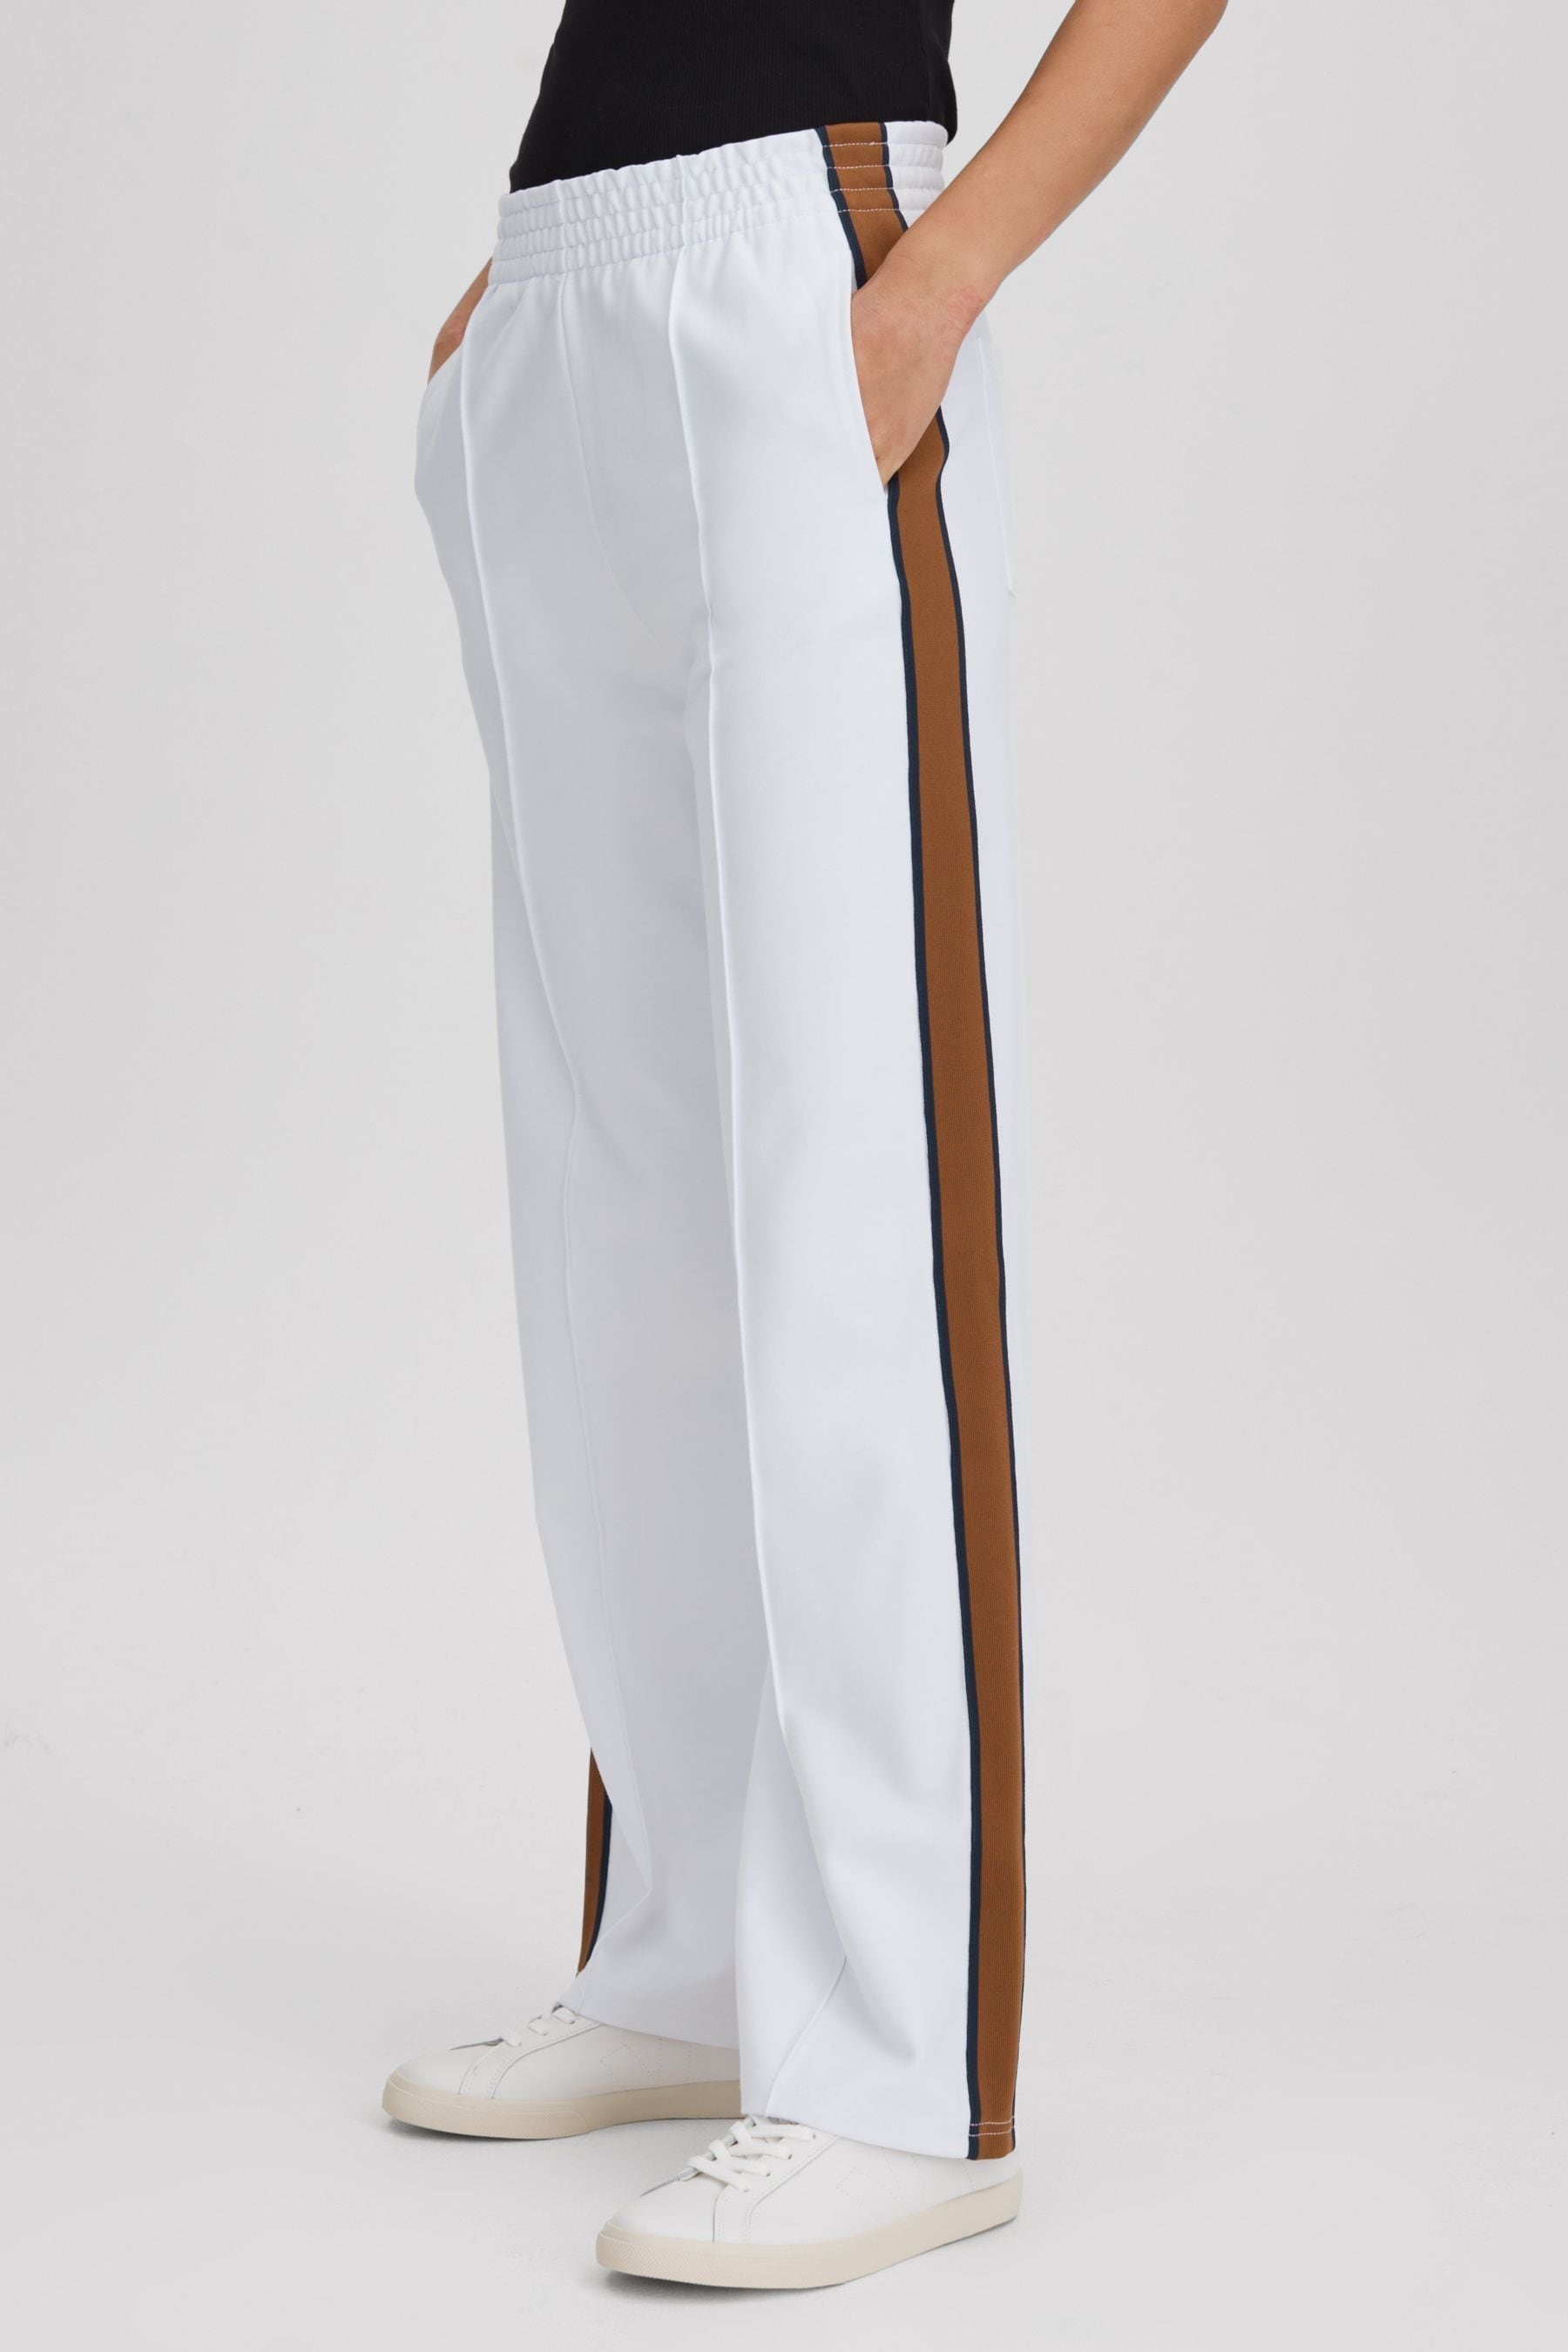 The Upside Elasticated Waist Side Stripe Joggers In White